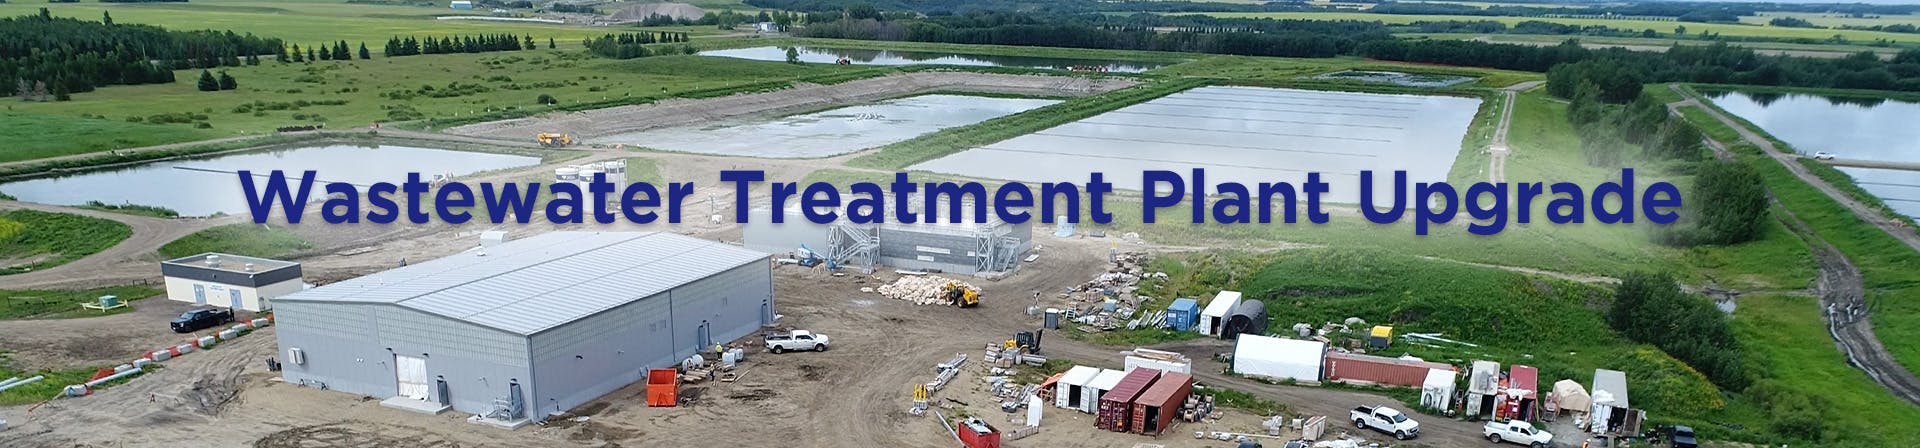 Wastewater Treatment Plant Banner